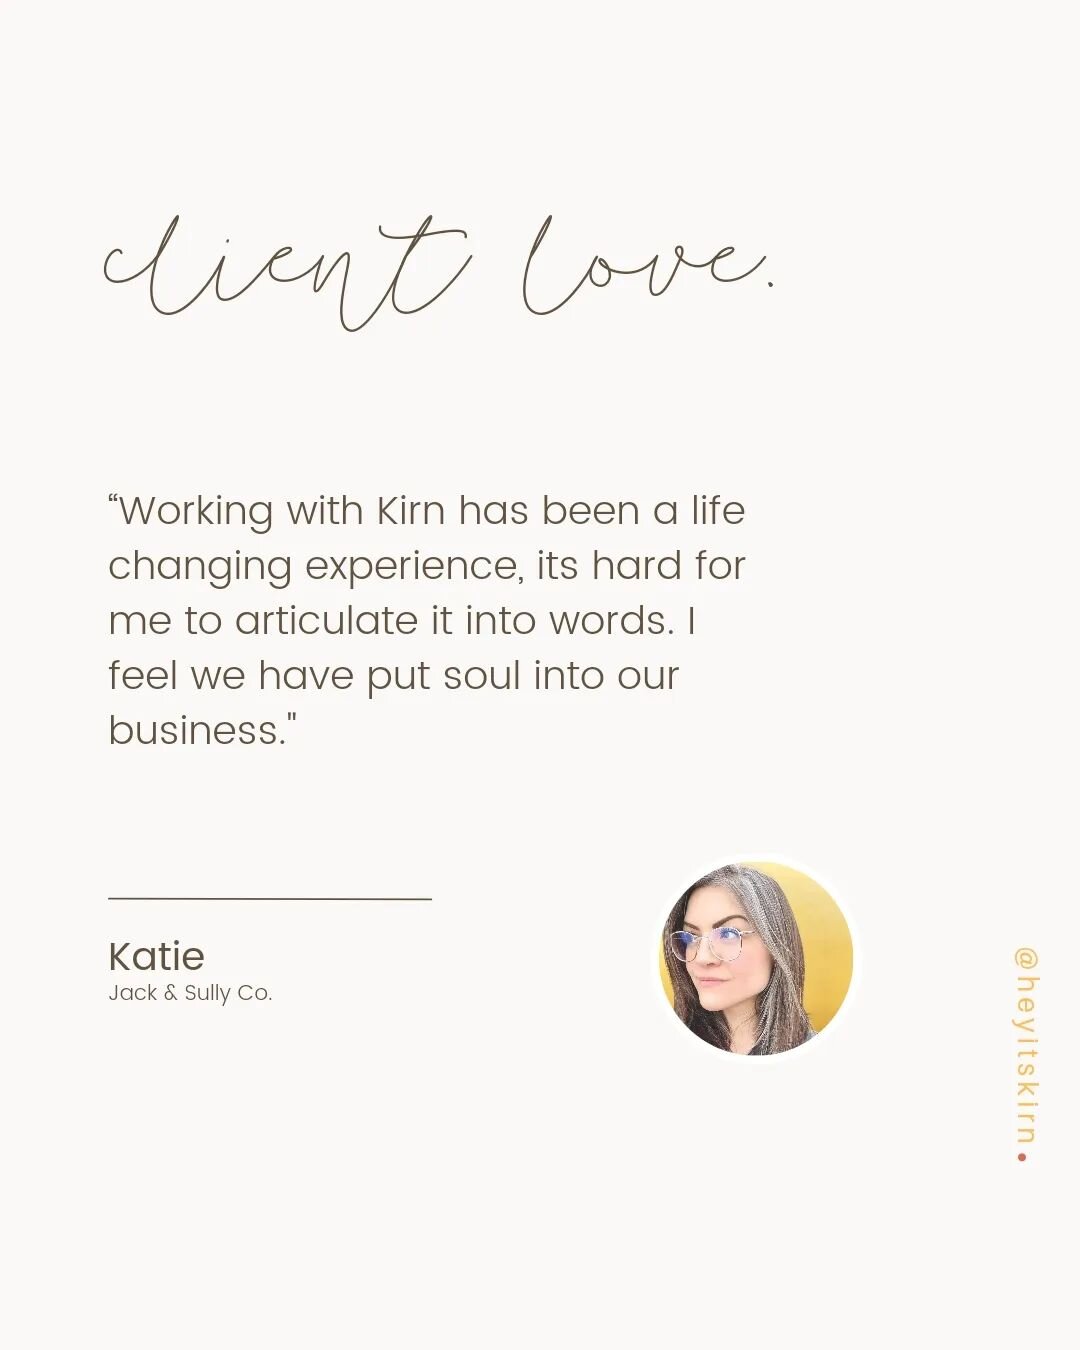 when Katie and I met, she was already doing a ton of inner work, 

reflecting on her life + business, and working through big questions, like how she could make moves from a place of joy, rather than obligation.

together, we dove even deeper.

we ar